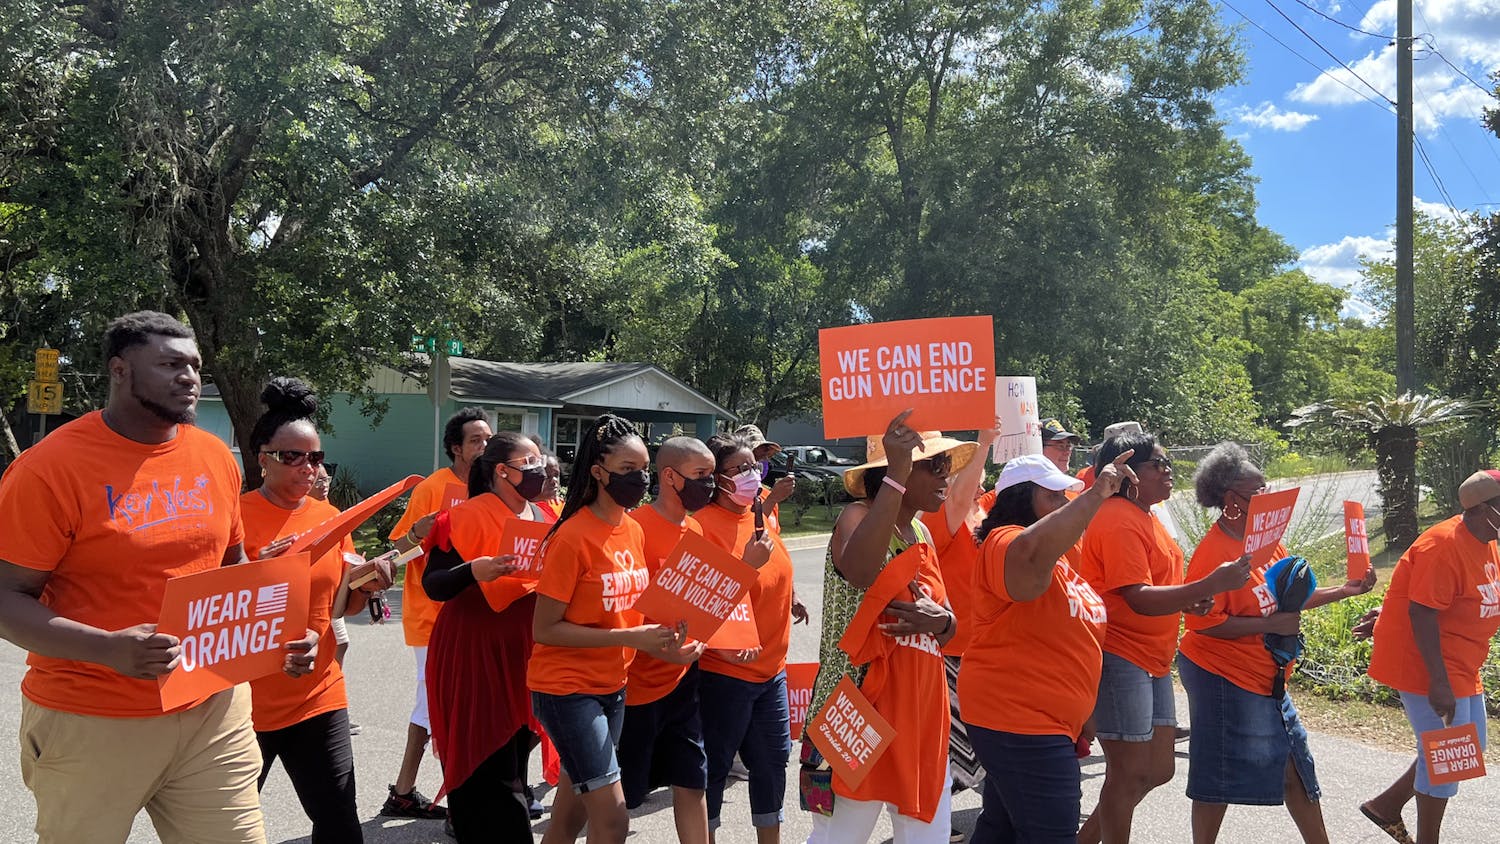 About 50 people march from Westside Church of God in Christ to Maude Lewis Park to protest gun violence and honor victims during the We Wear Orange campaign June 4, 2022.